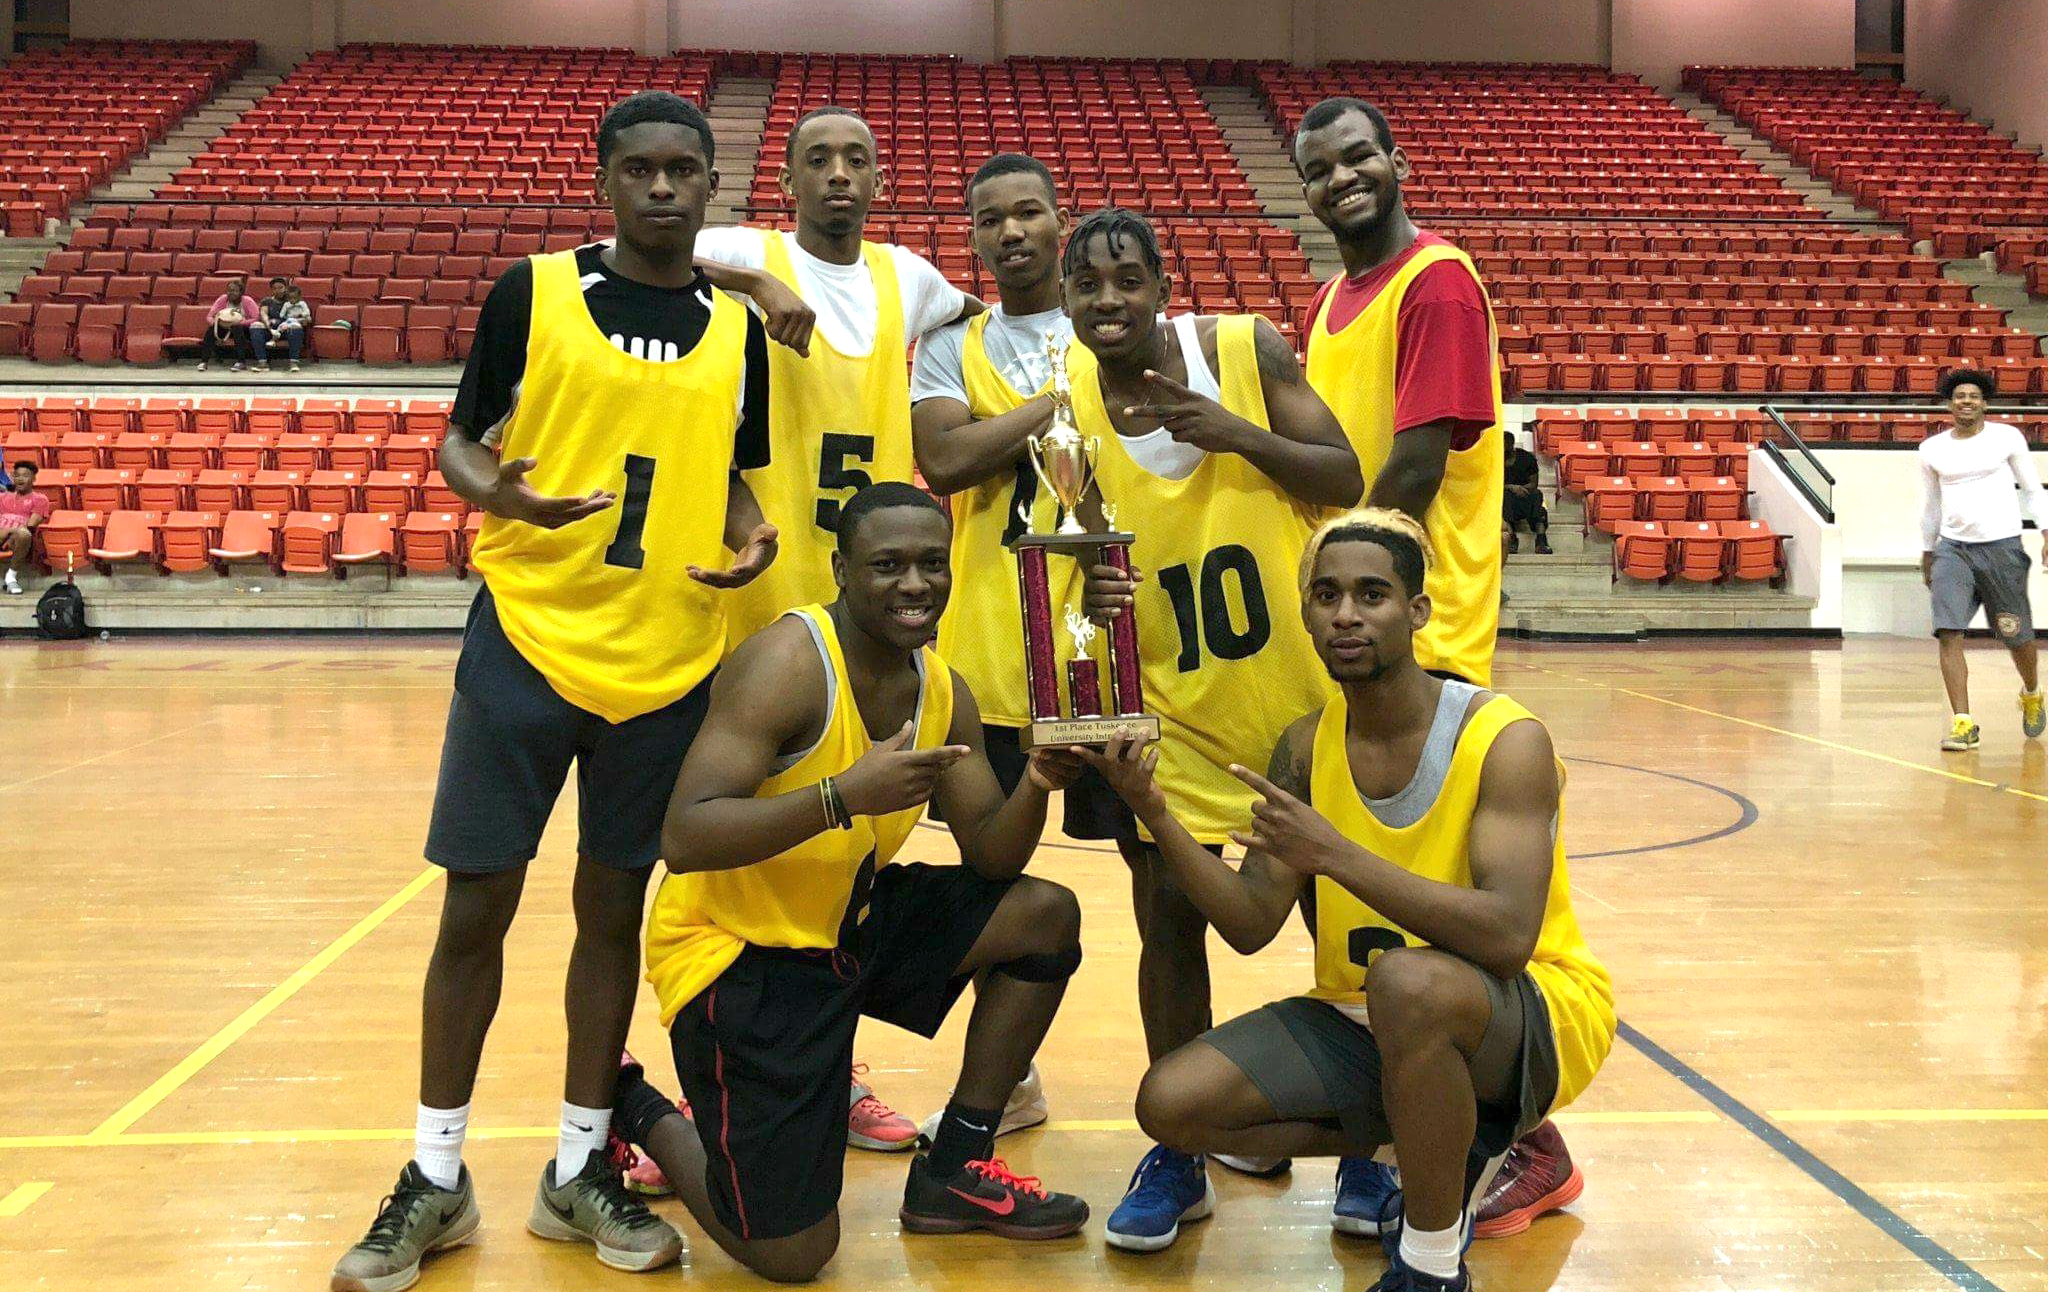 Intramural 5 on 5 basketball champs with trophy